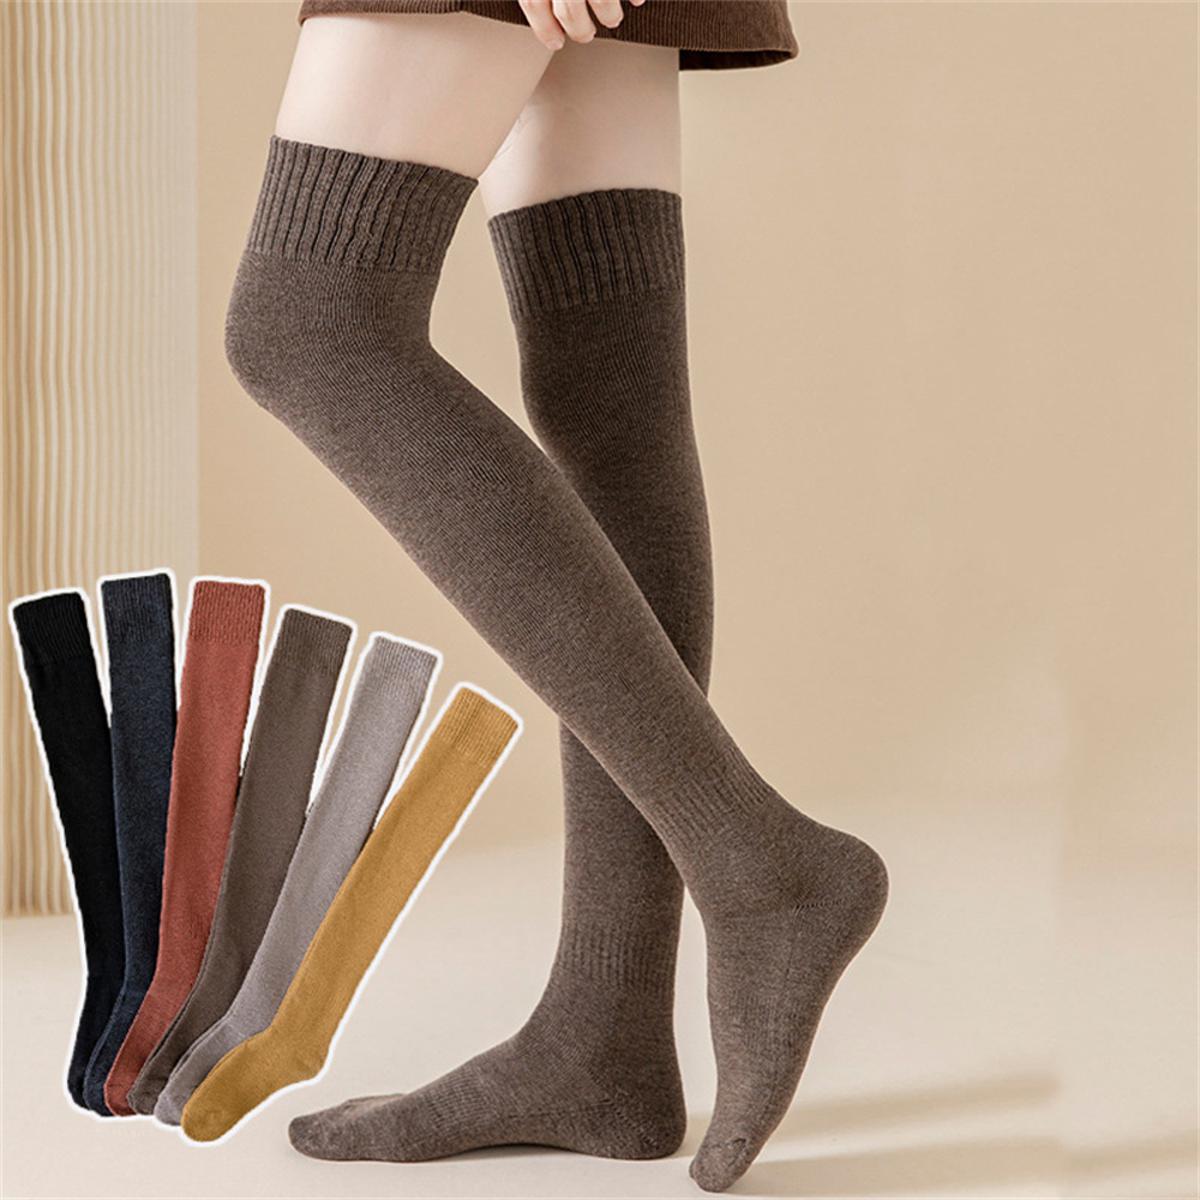 Long Socks Winter Women Stockings Thick Cotton Solid Warm